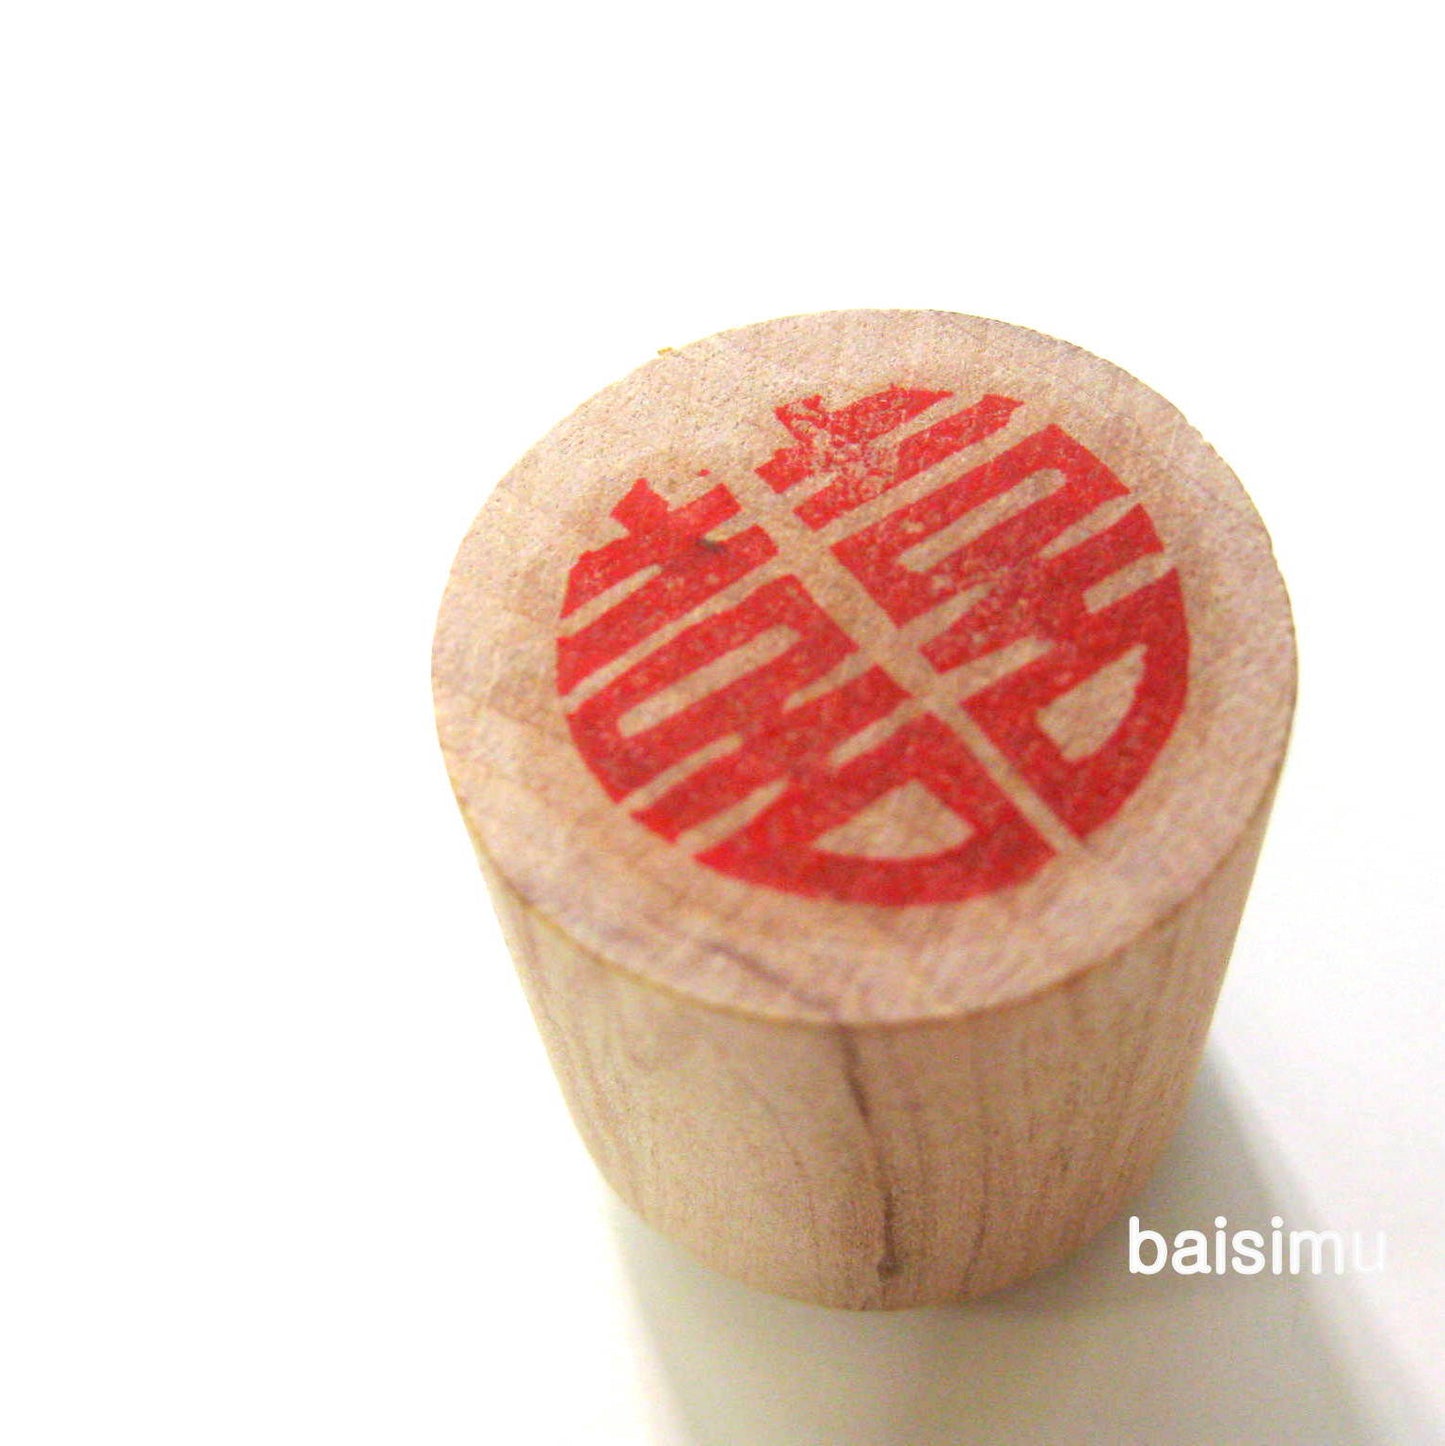 Double happiness stamp